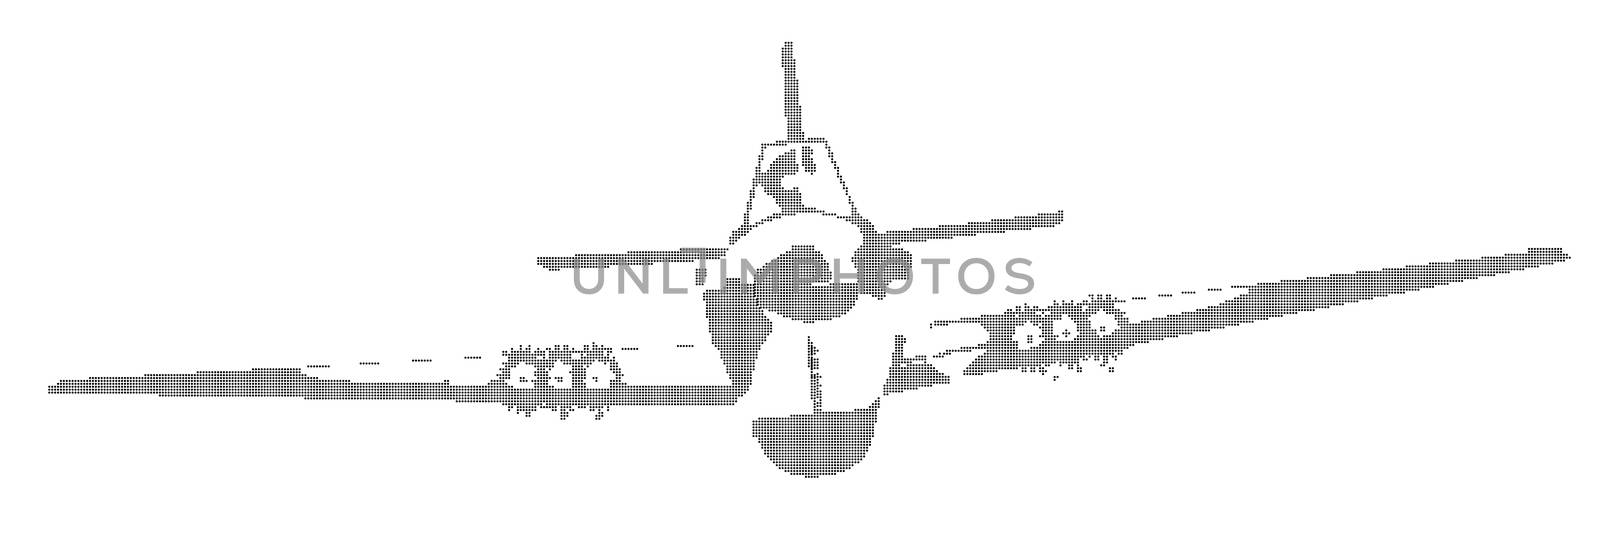 Aircraft In Halftone by Bigalbaloo